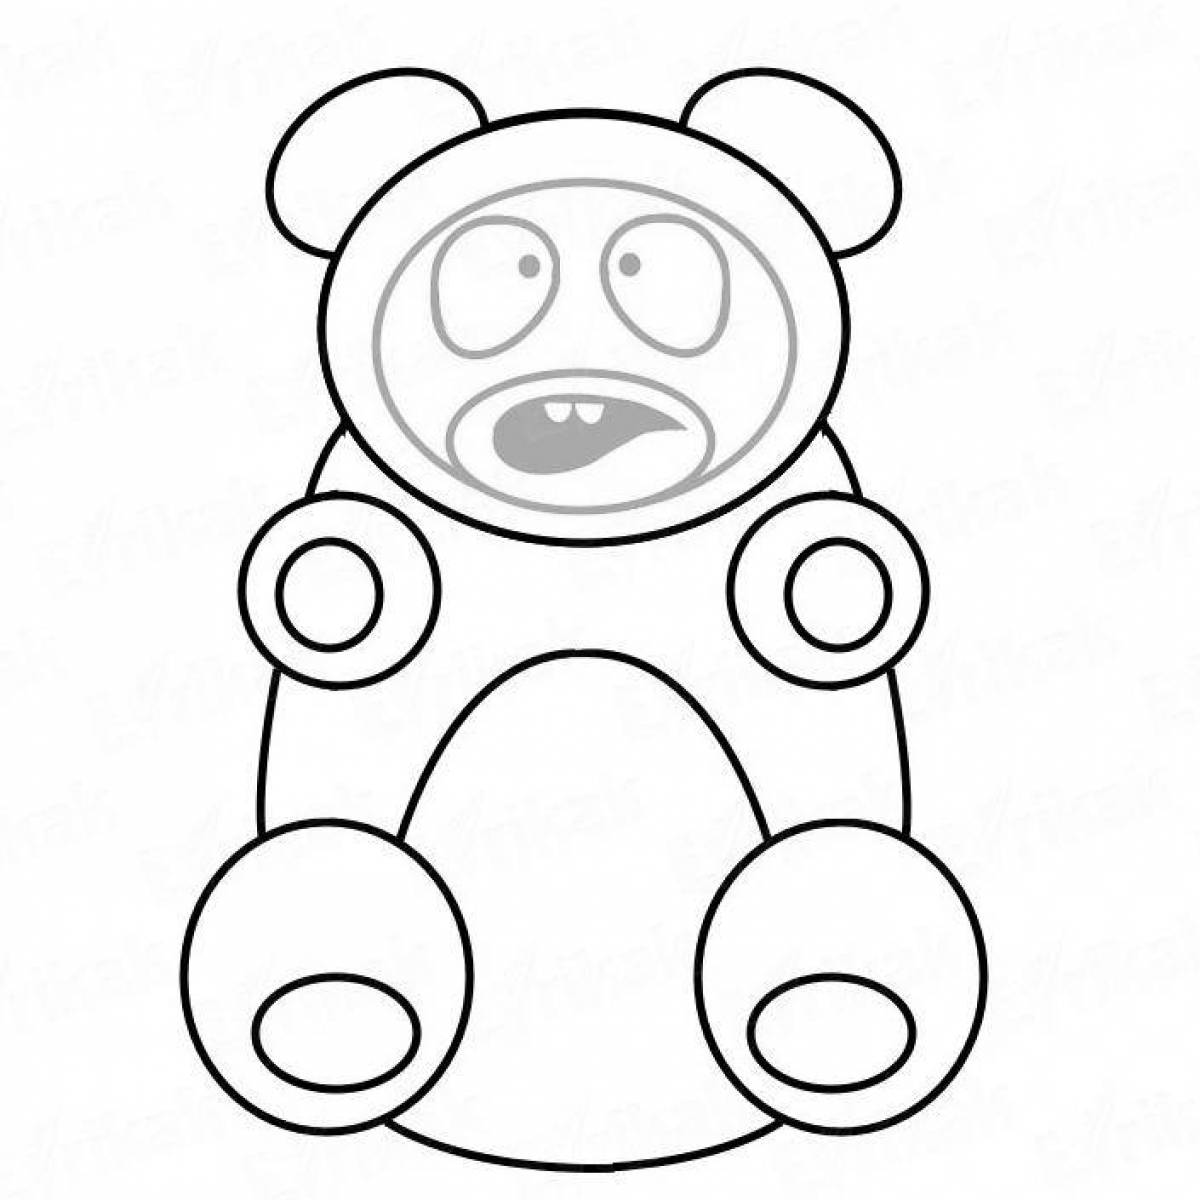 Animated coloring of bear cub valery